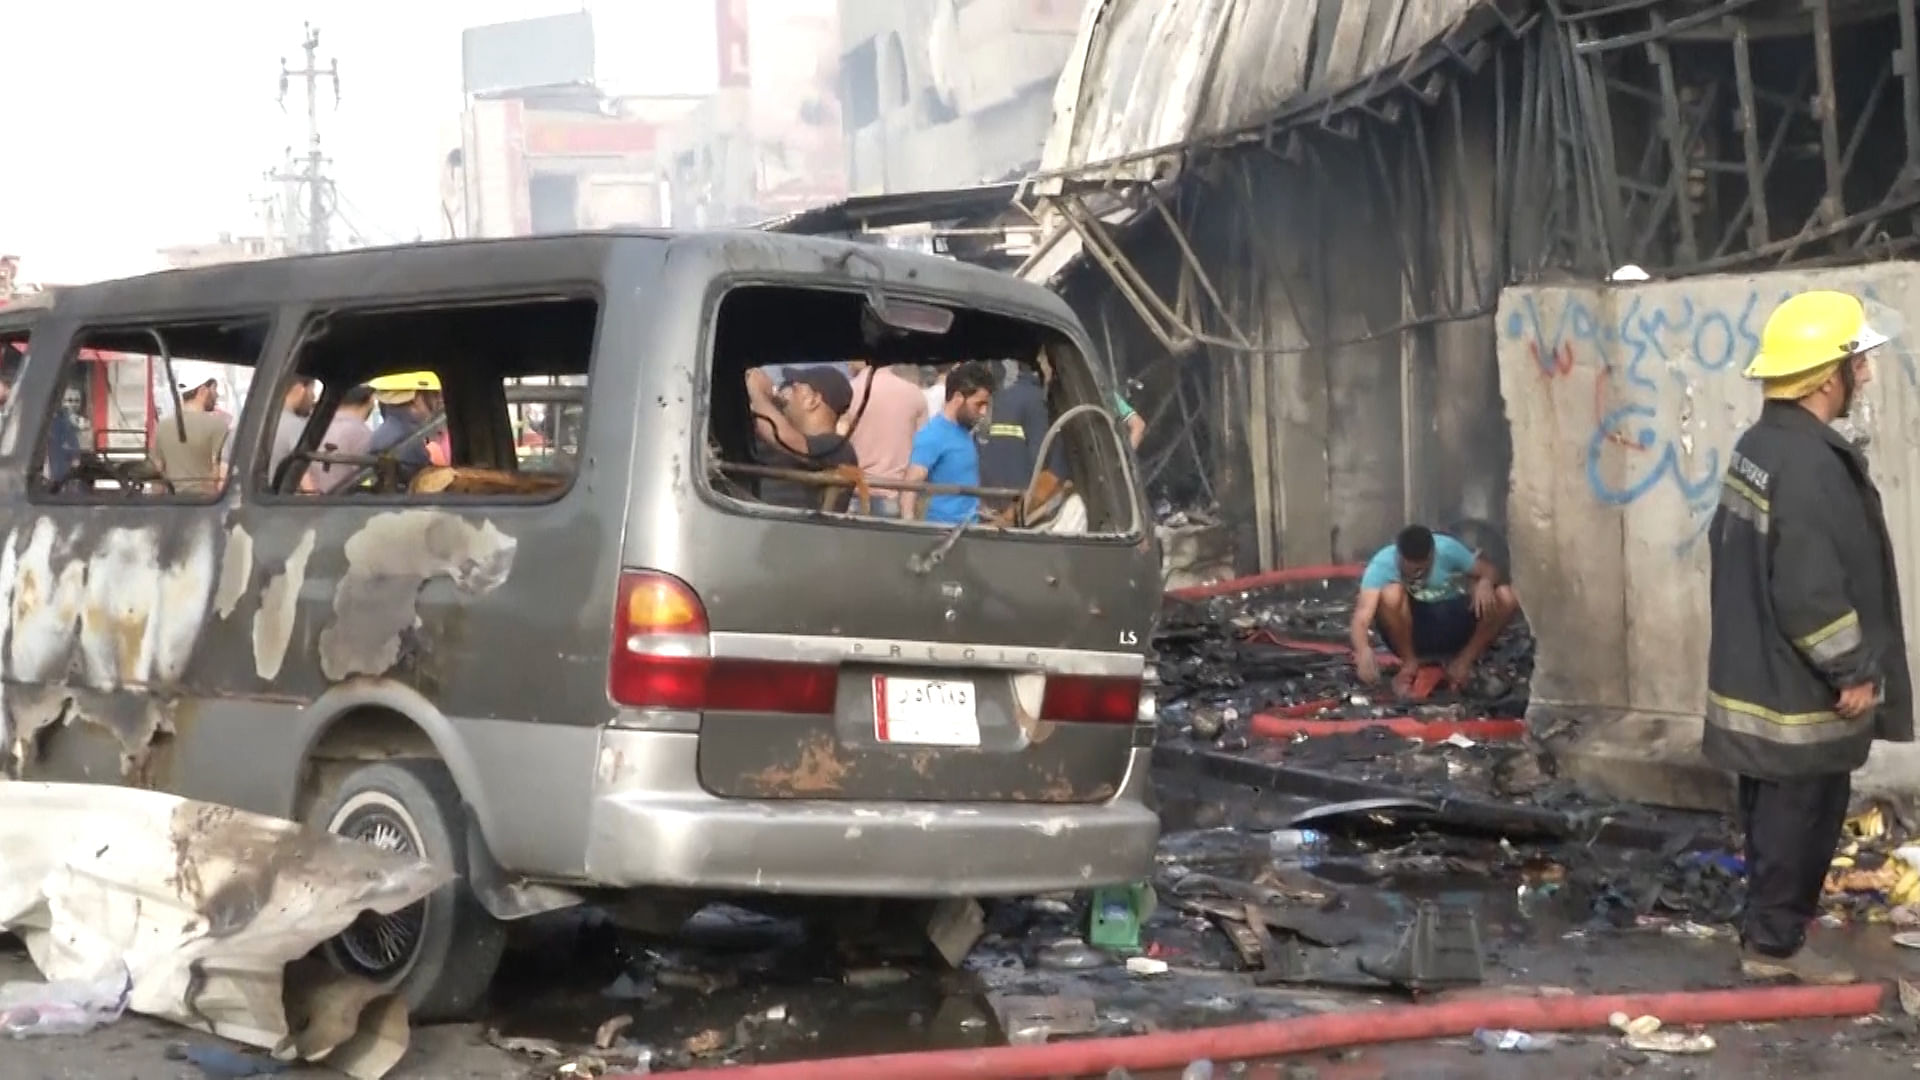 A suicide bomber targeted a market in a commercial area in the Iraqi capital, Baghdad, on Monday killing at least 14 people including two police officers. (Photo: AP screengrab)